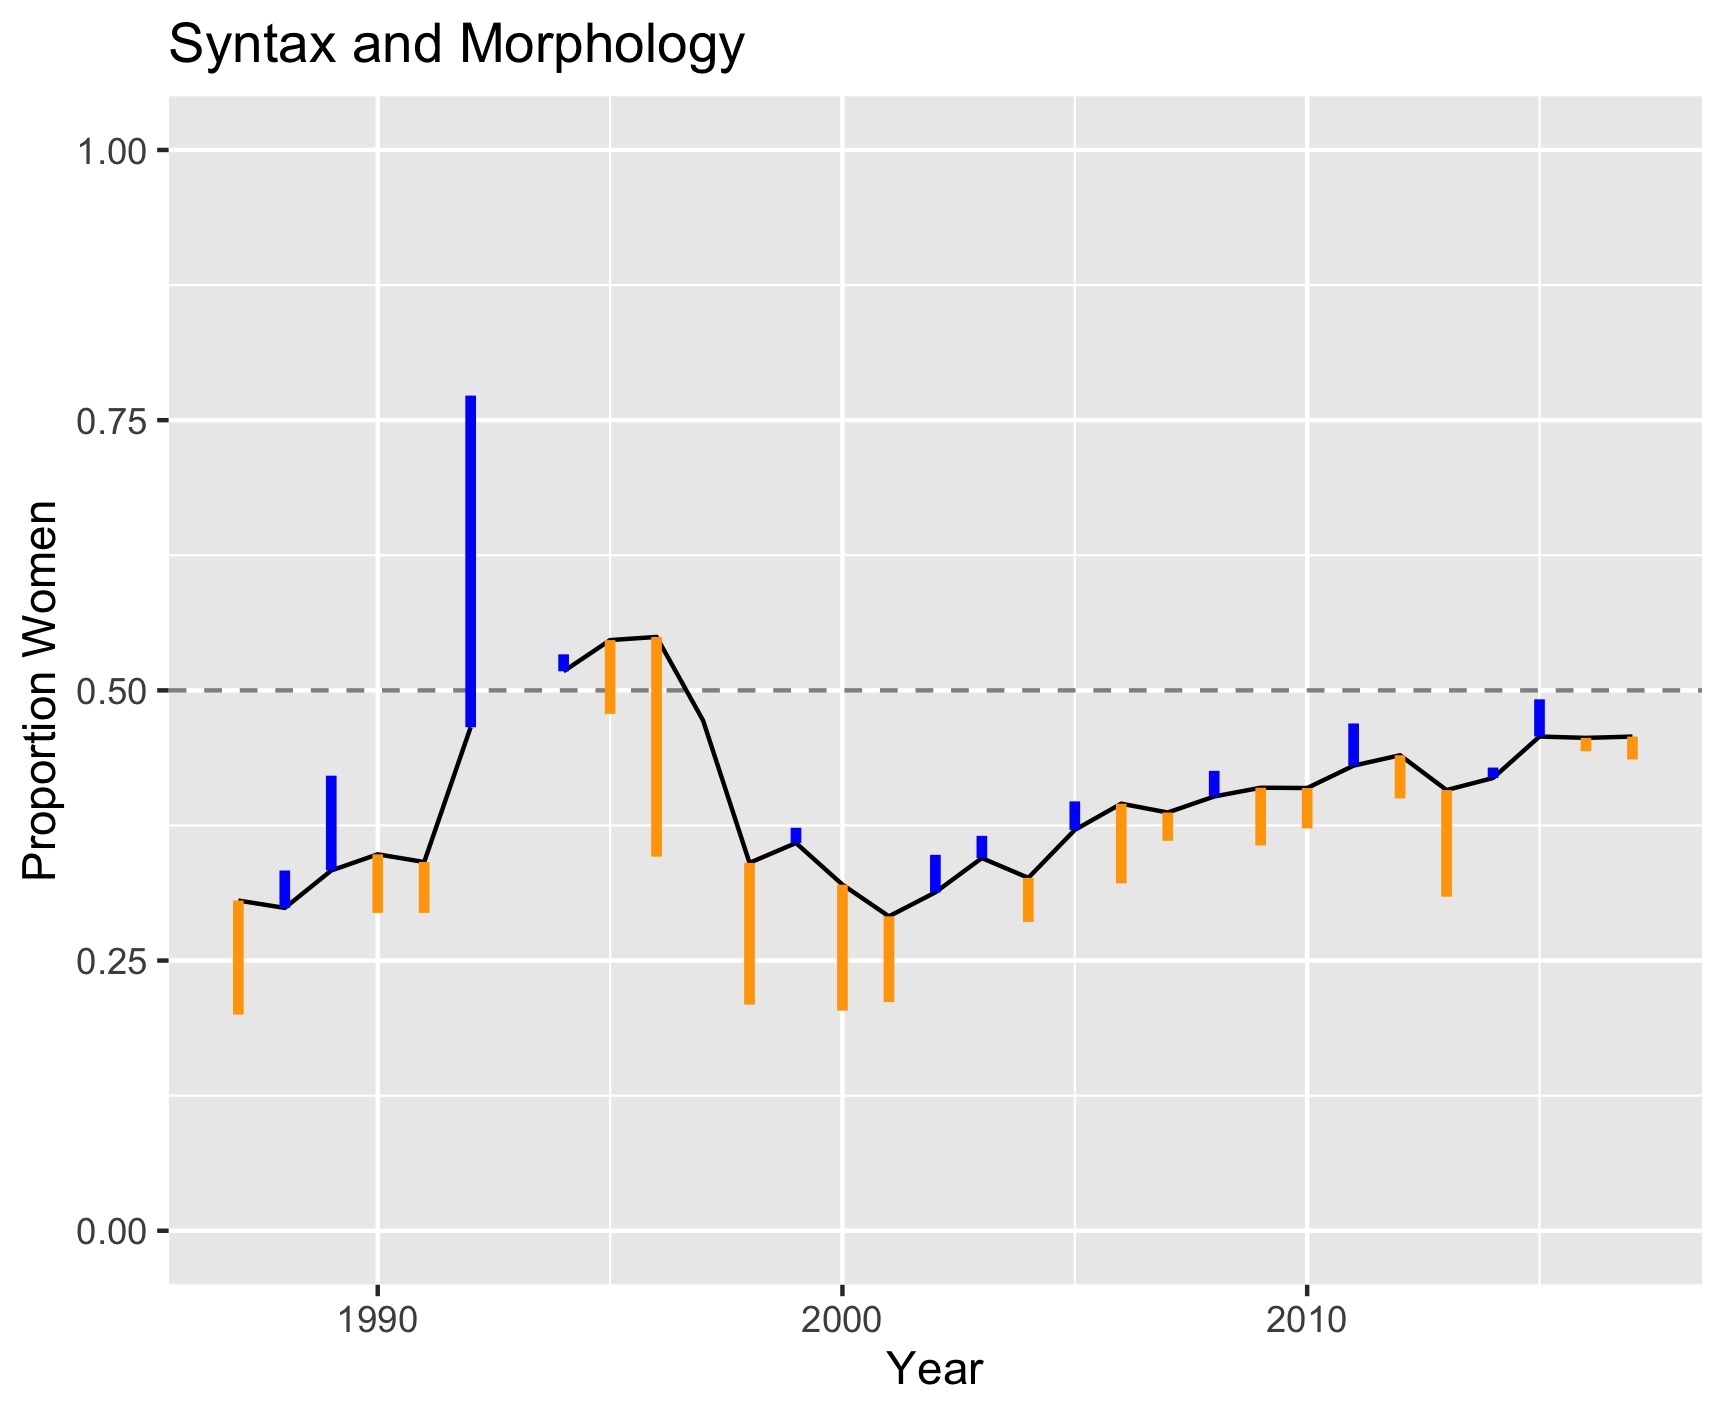 Publishing rates across time, relative to an estimate of representation in the field, in the fields of syntax and morphology